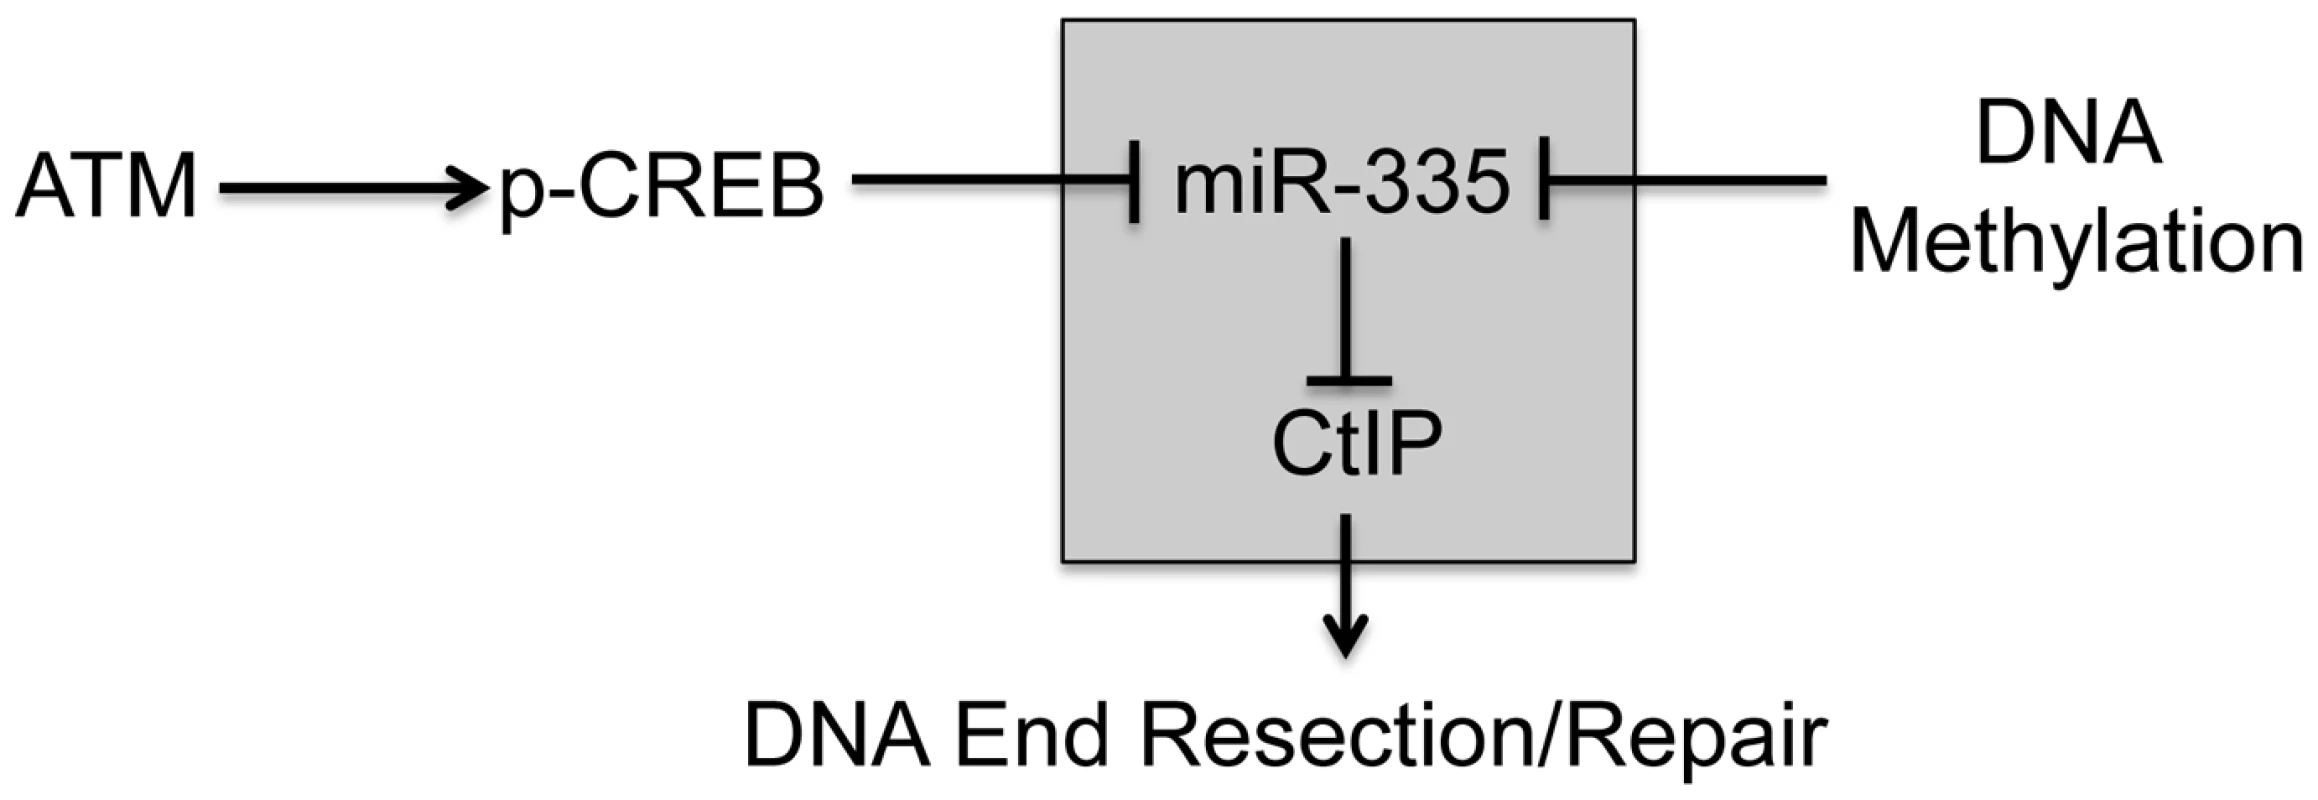 Operational model of ATM–dependent miR-335 DDR modulation pathway.